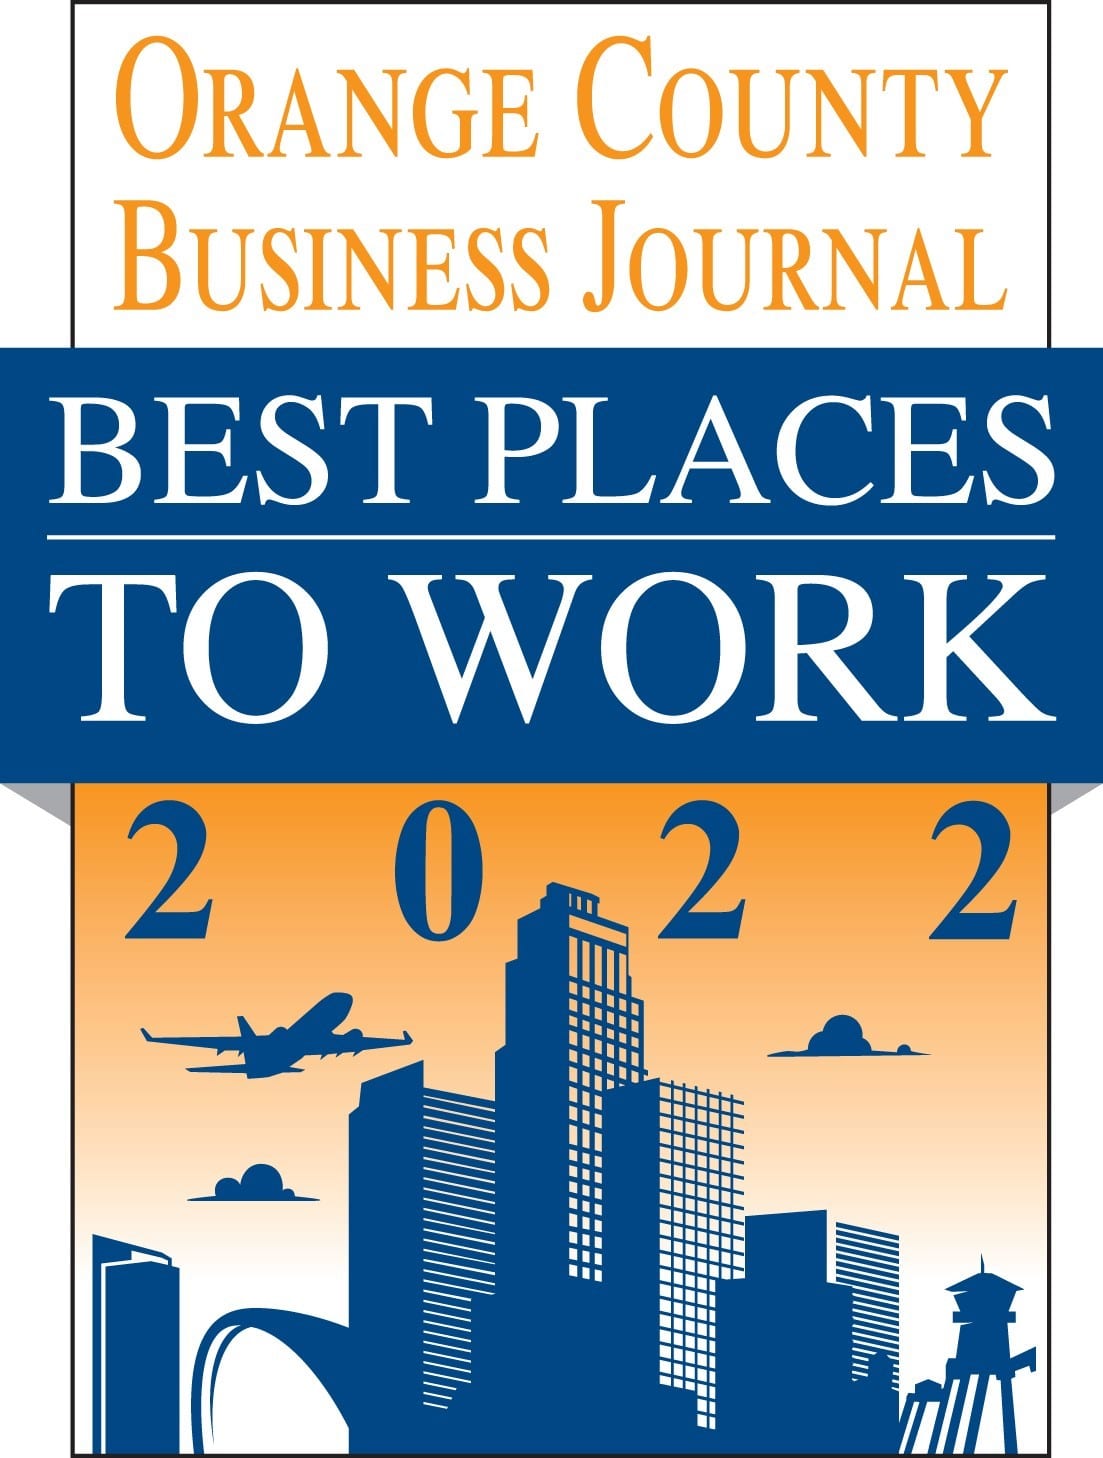 Technossus Voted One of OC's Best Places to Work in 2022